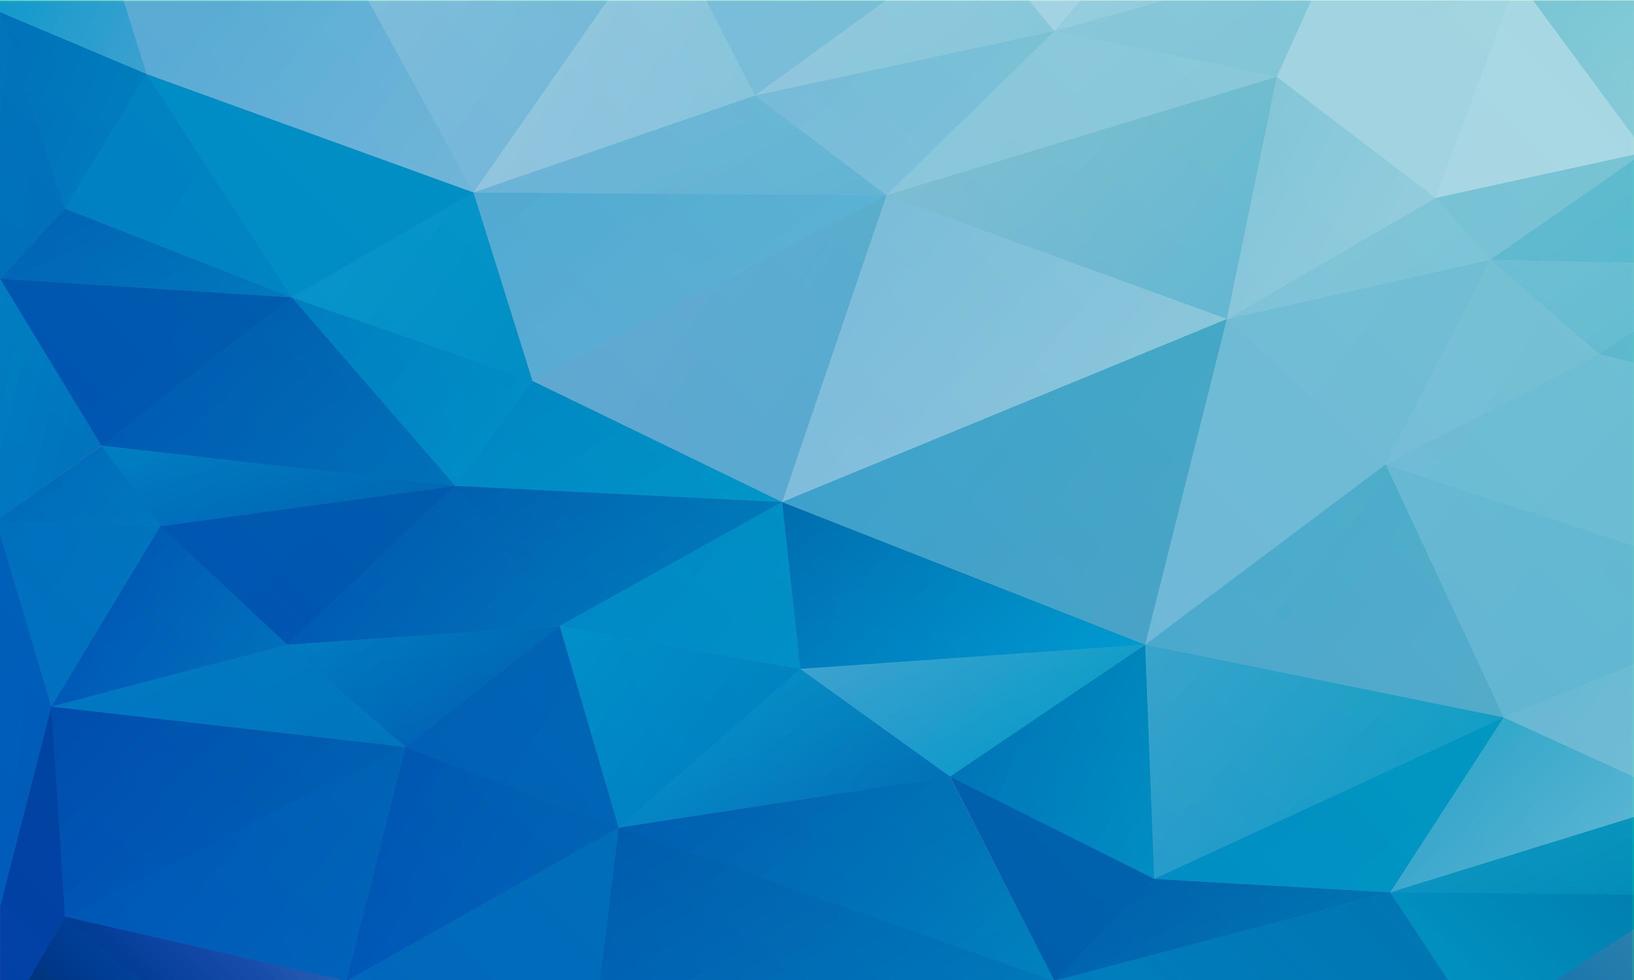 abstract Blue background, low poly textured triangle shapes vector